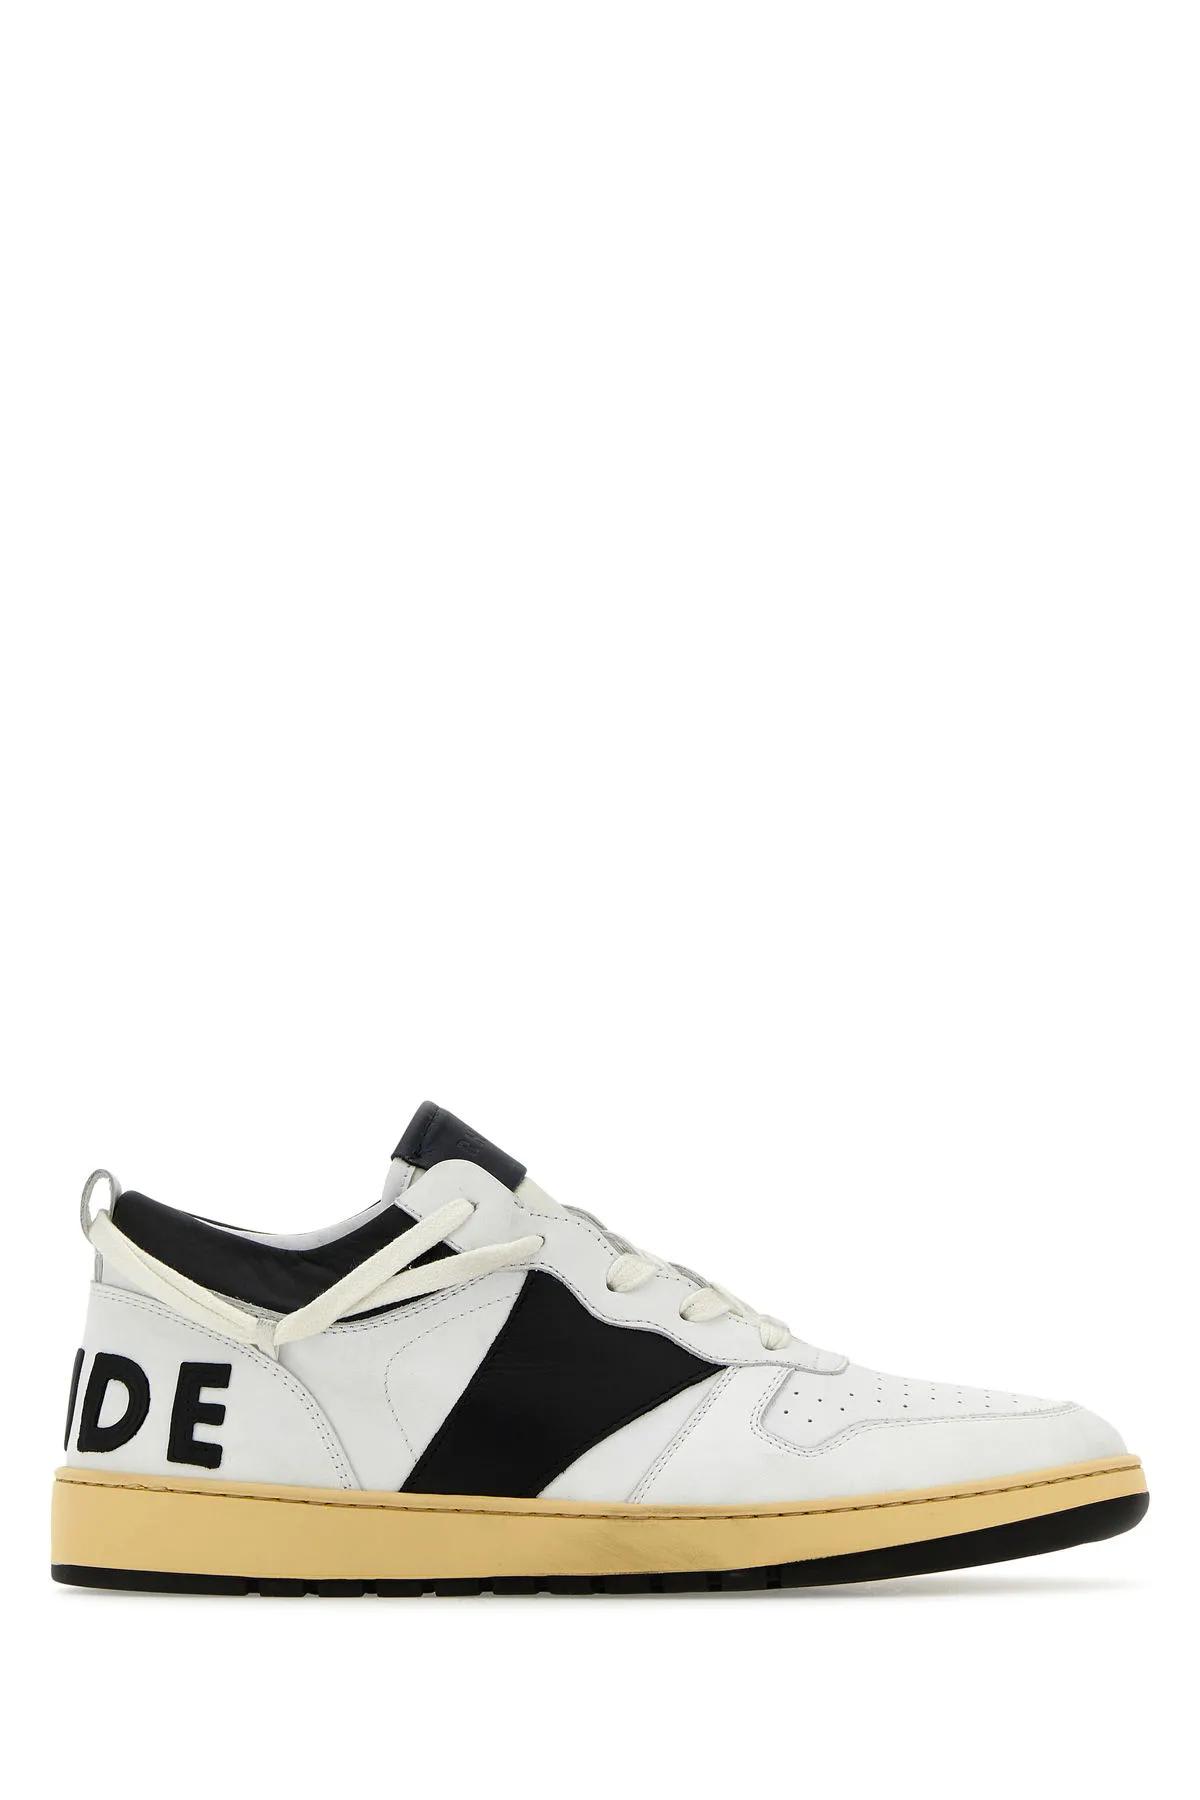 Rhude Two-tone Leather Rhecess Sneakers